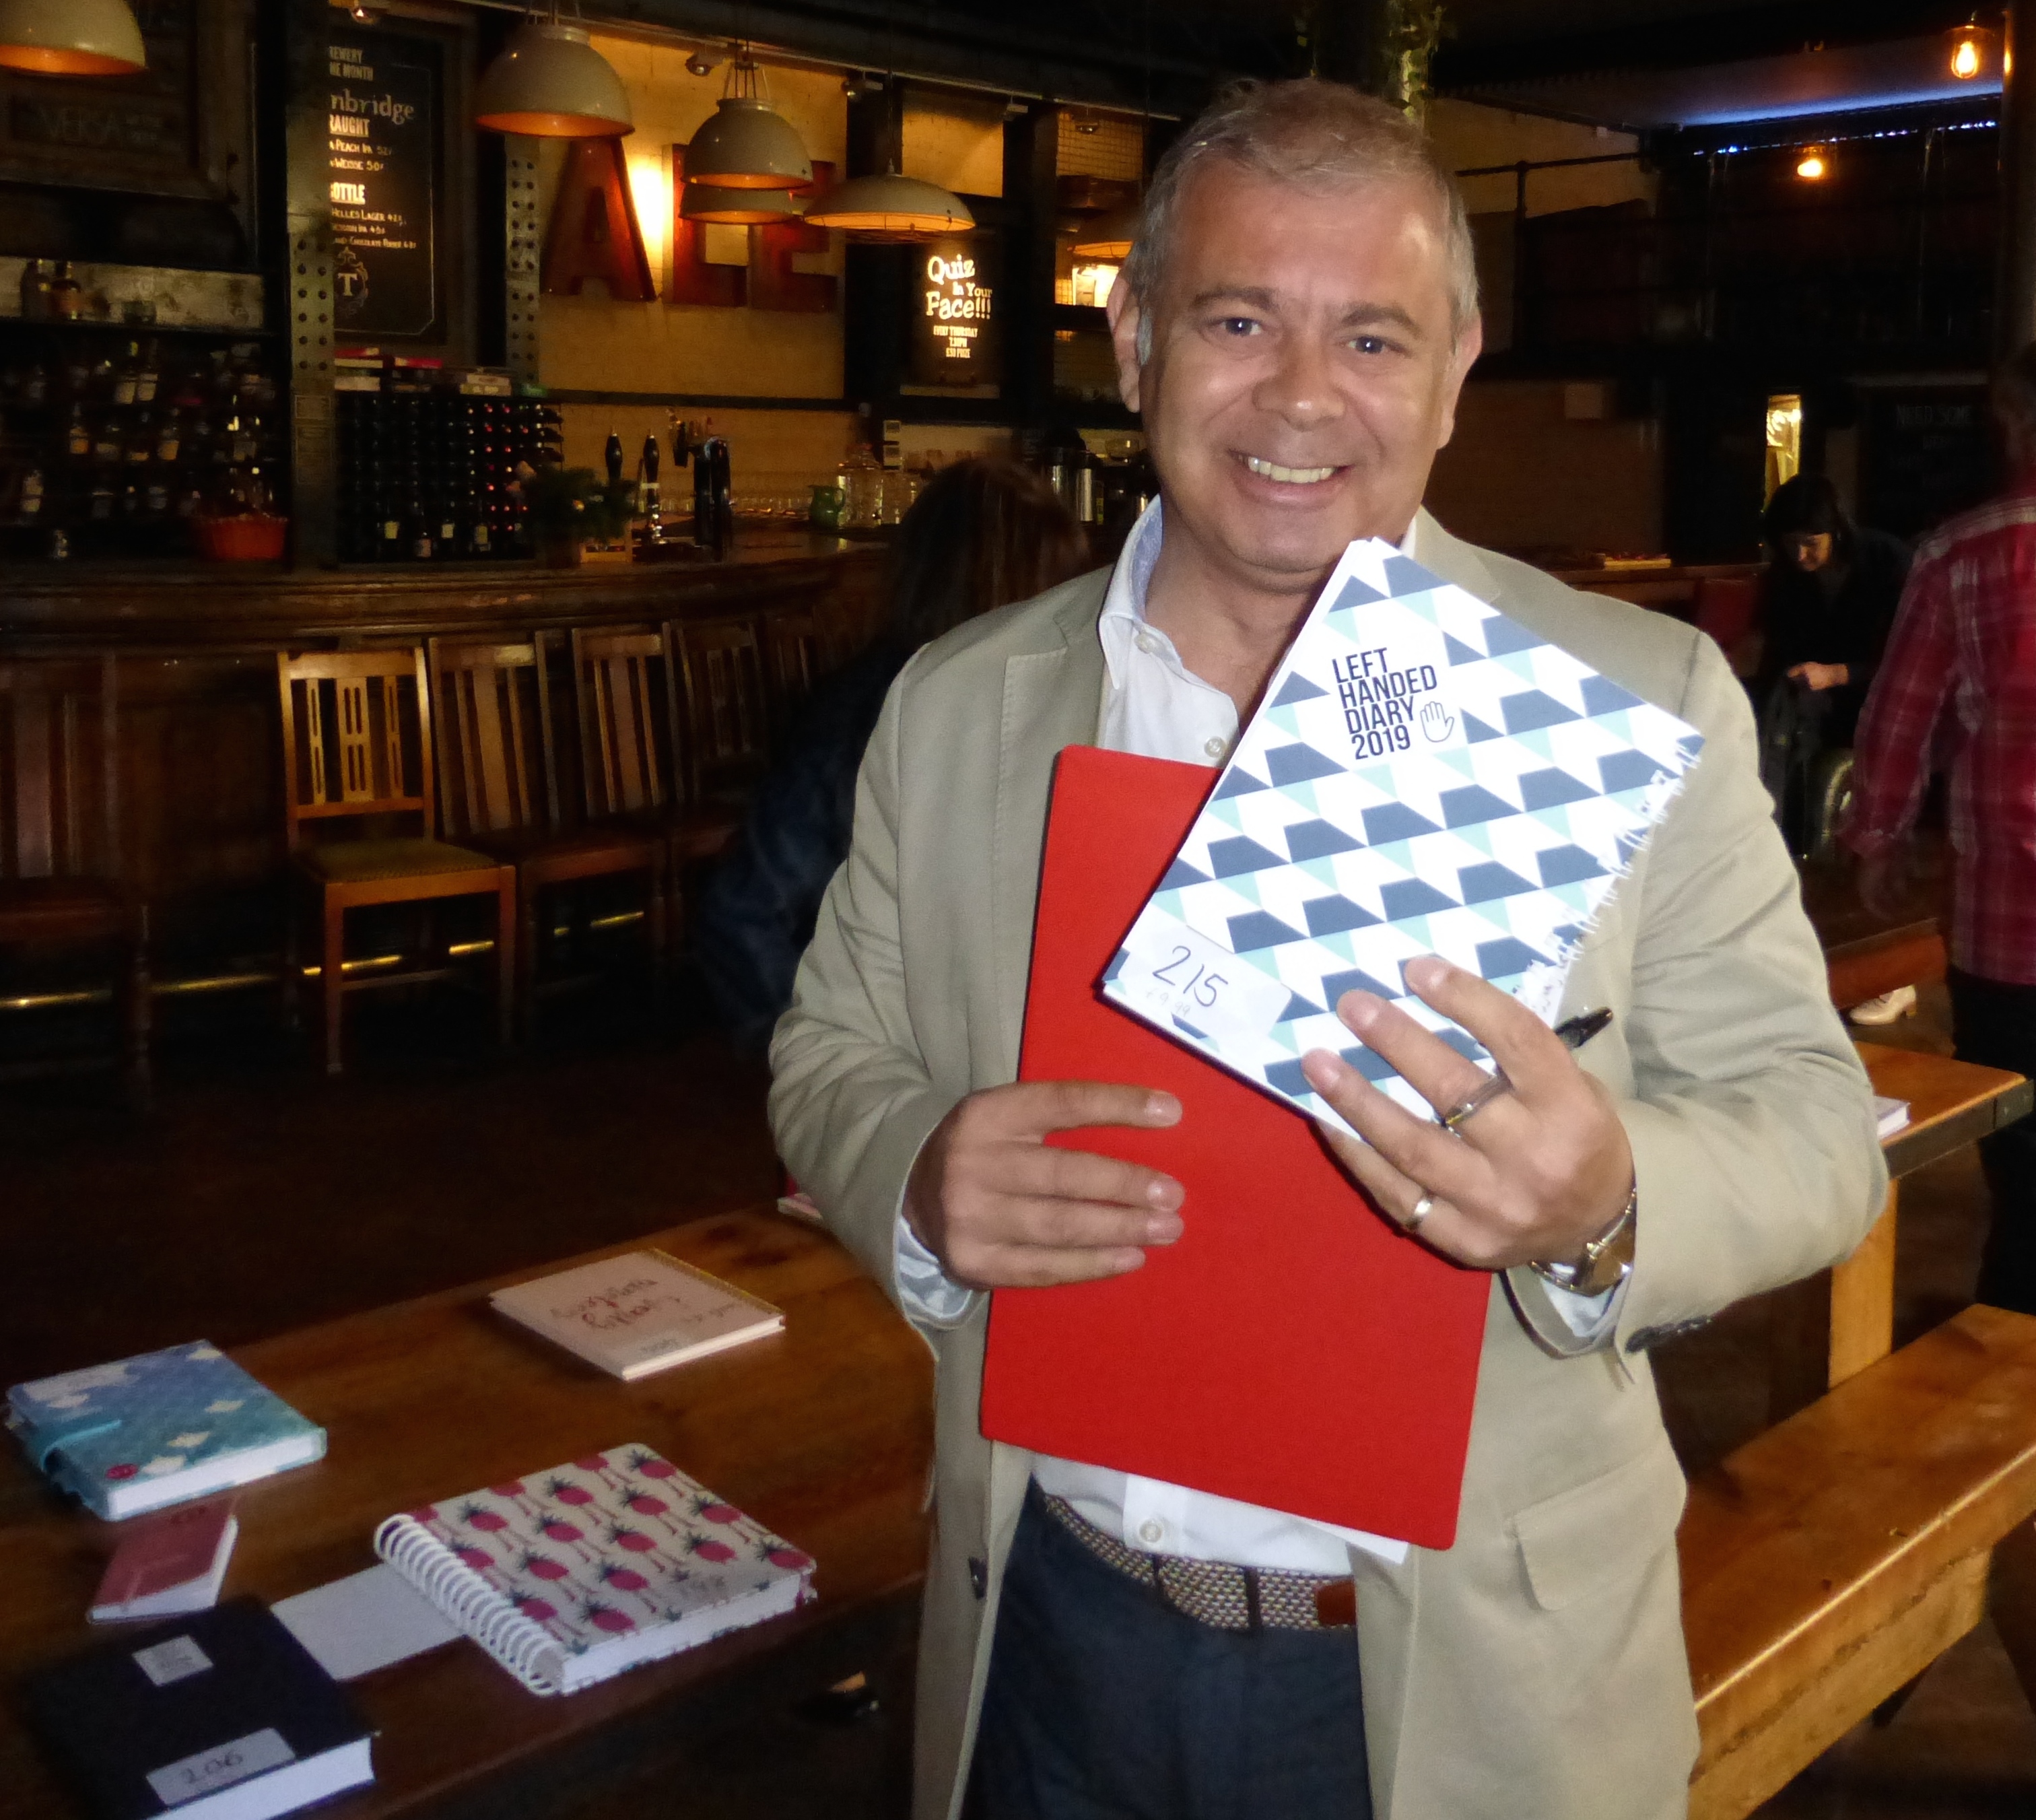 Above: As a left-hander himself, Miles Robinson (of House of Cards) was keen to put a Left-Handed Diary to the test!